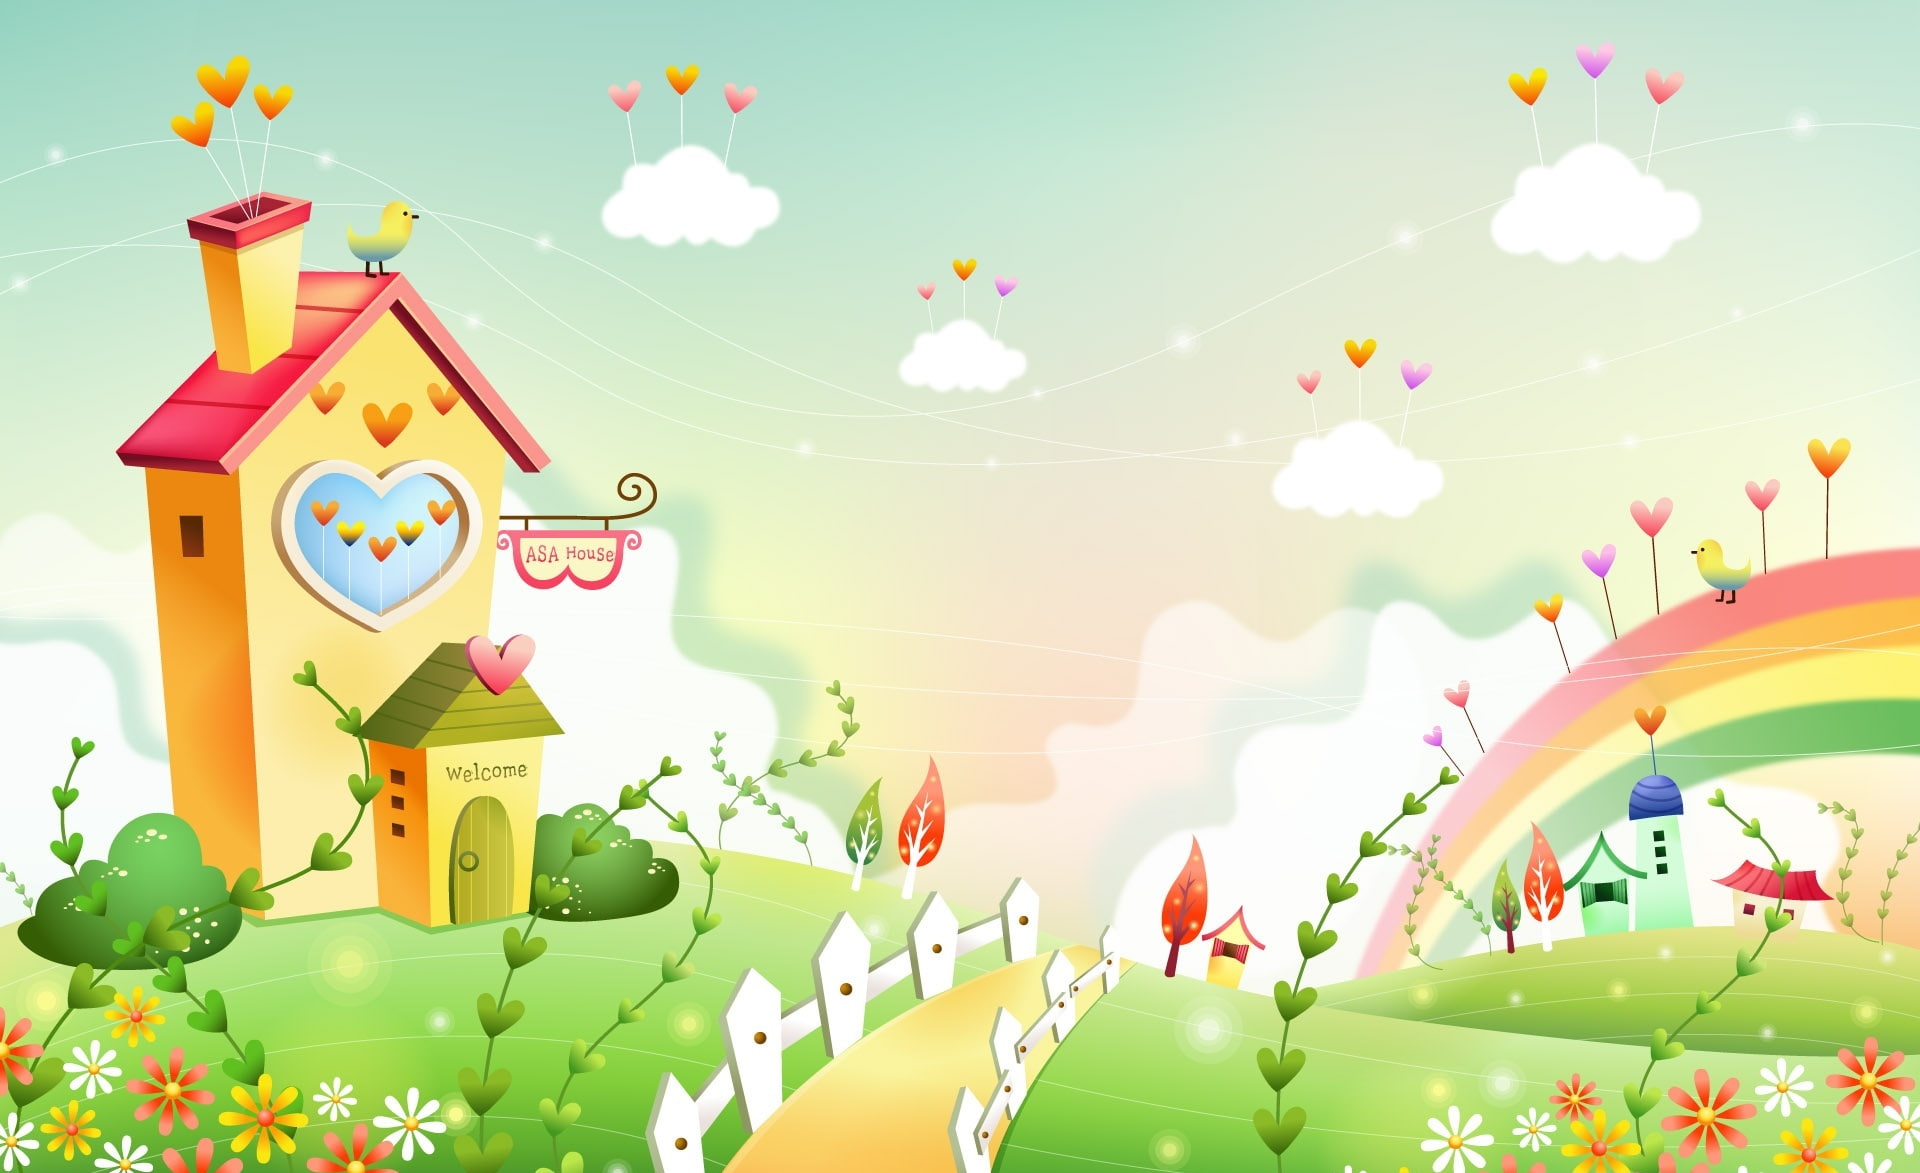 Spring Landscape With Rainbow 3 HD Wallpaper, yellow house wallpaper